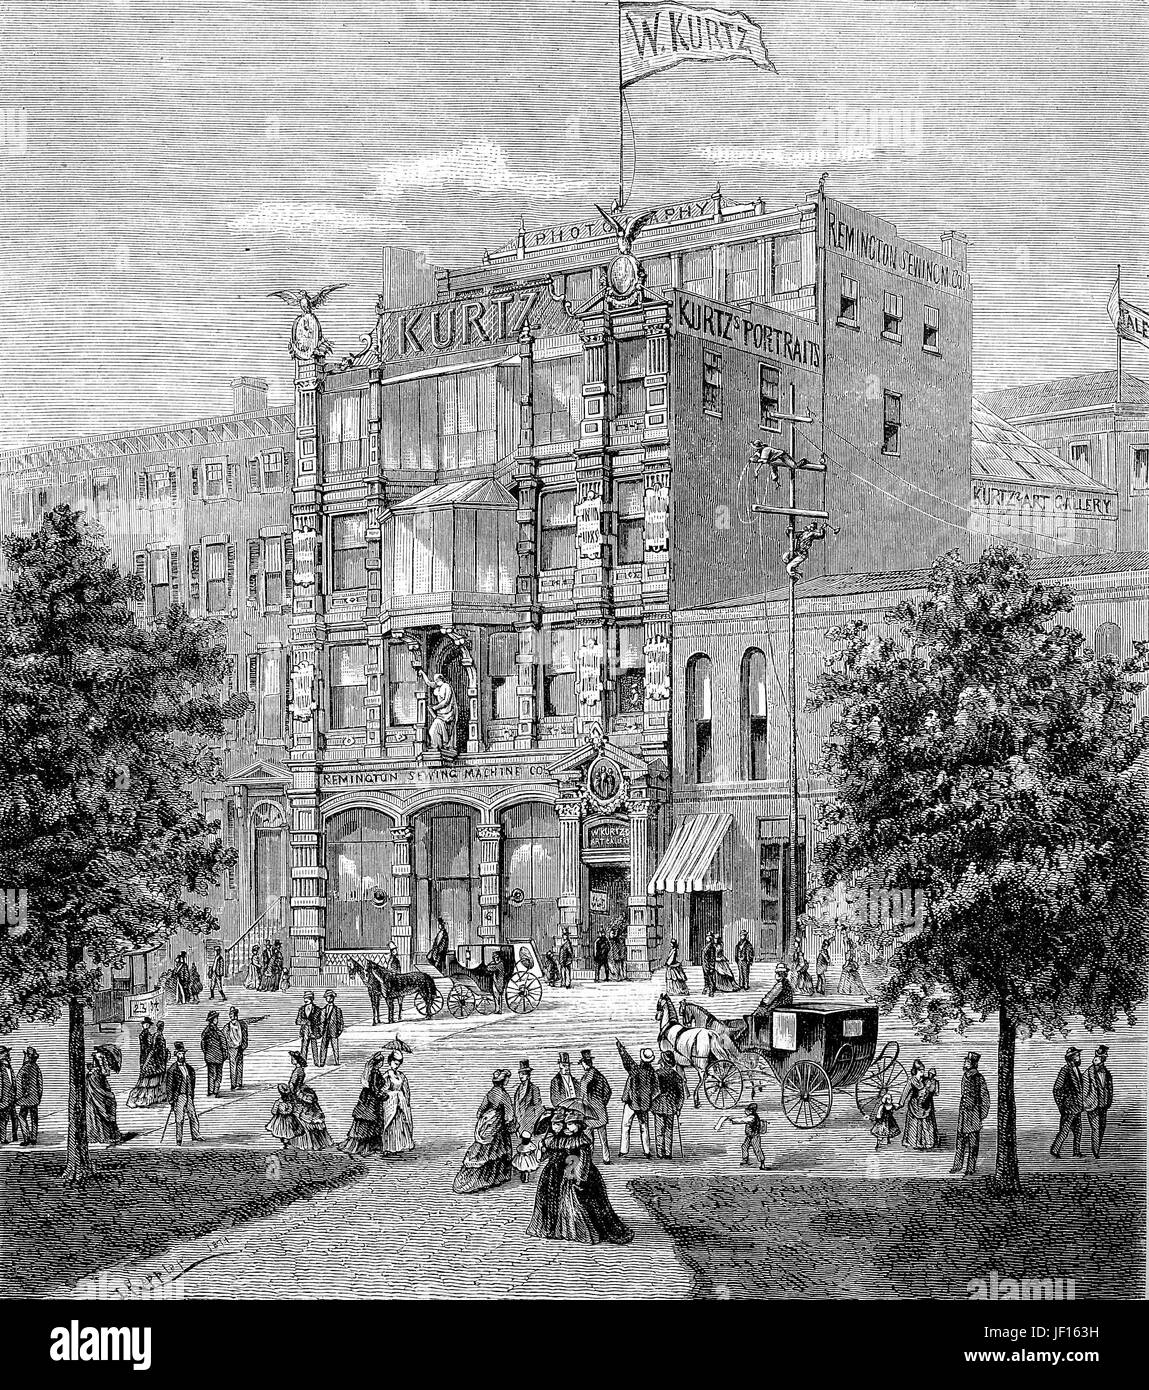 Historical illustration of the new building of Wilhelm Kurtz photography in New York, USA, 1880, William Kurtz, 1833 - 1904 was a German-American artist, illustrator, and photographer, Digital improved reproduction from an original print from 1888 Stock Photo